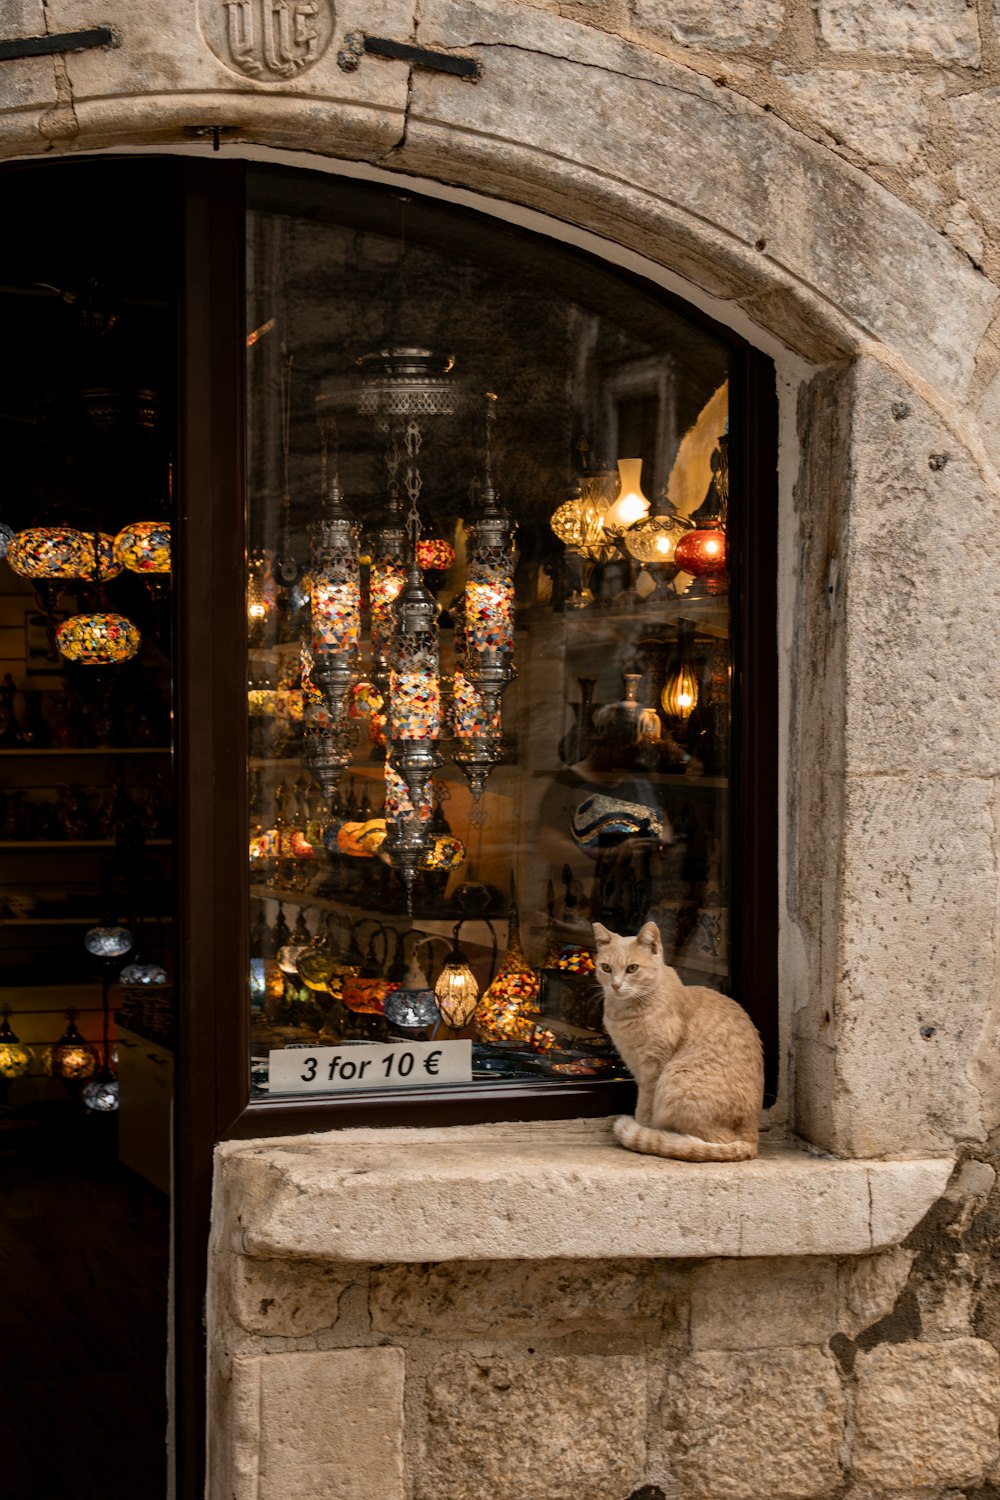 a cat sitting on a ledge in front of a store window